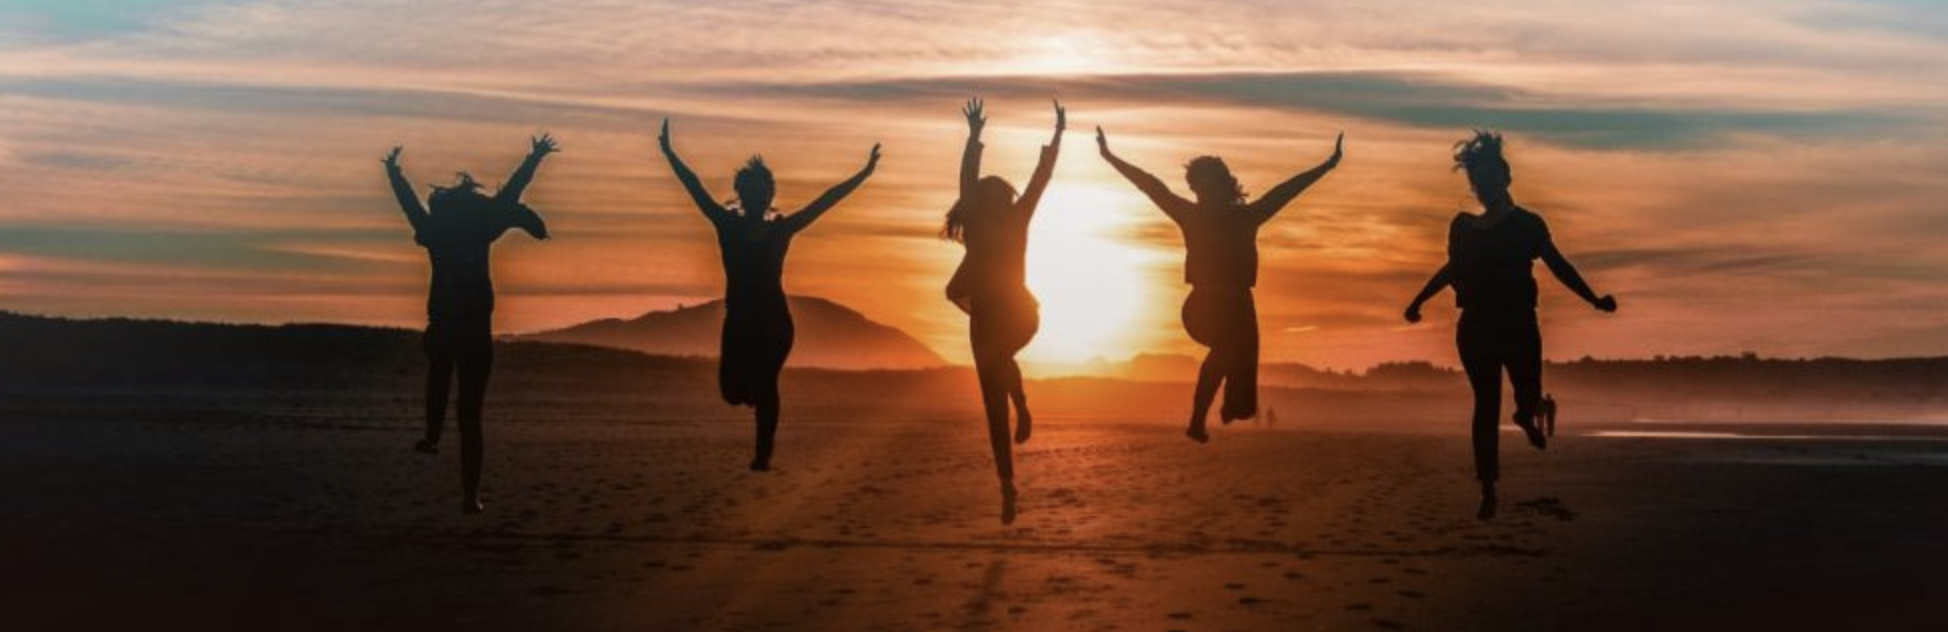 Five Women Jumping free at the same time in the sunrise